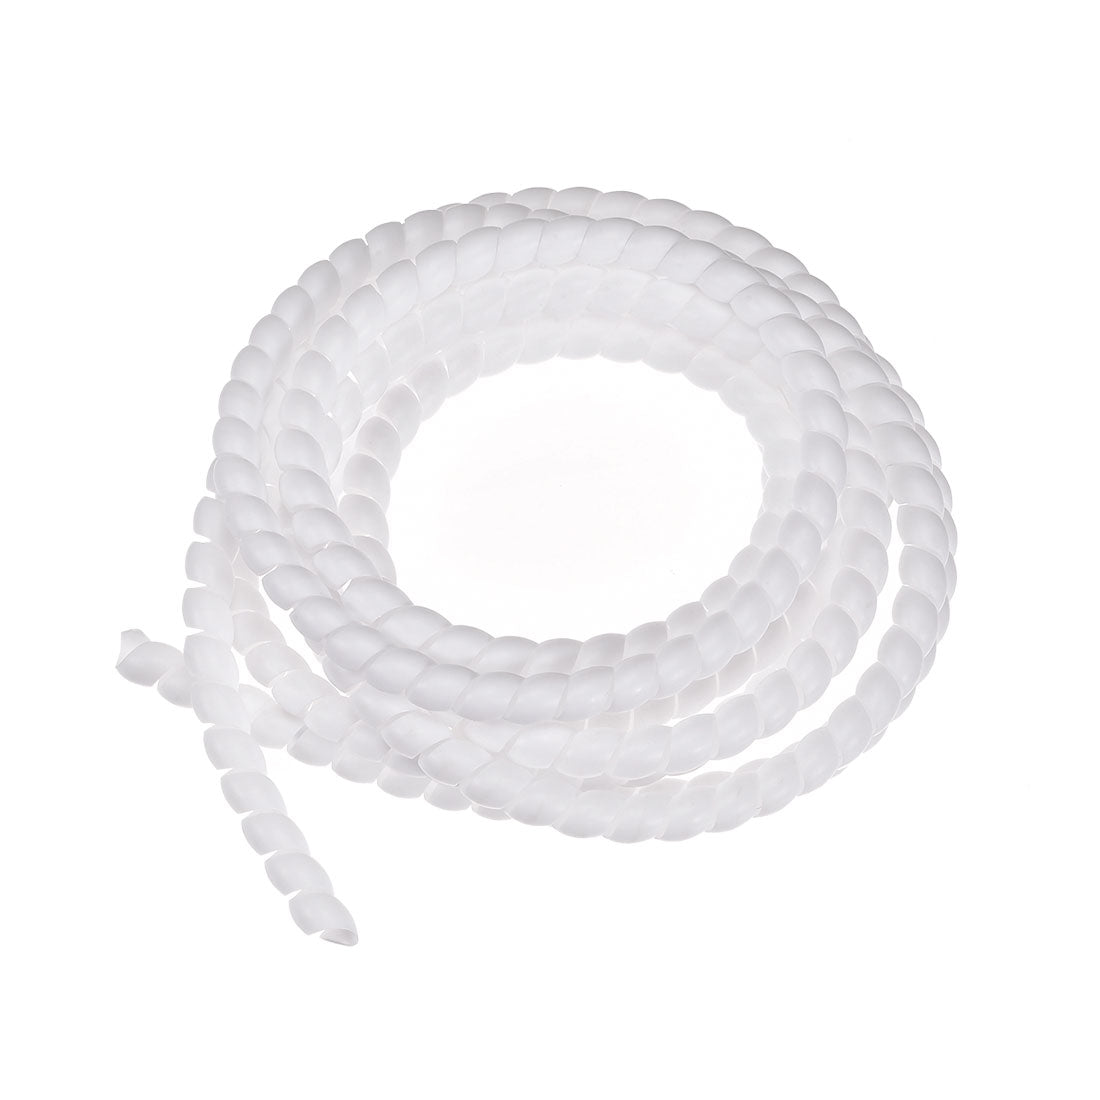 uxcell Uxcell Flexible Spiral Tube Wrap Cable Management Sleeve 8mm x 10mm Computer Wire Manage Cord 3 Meters Length White